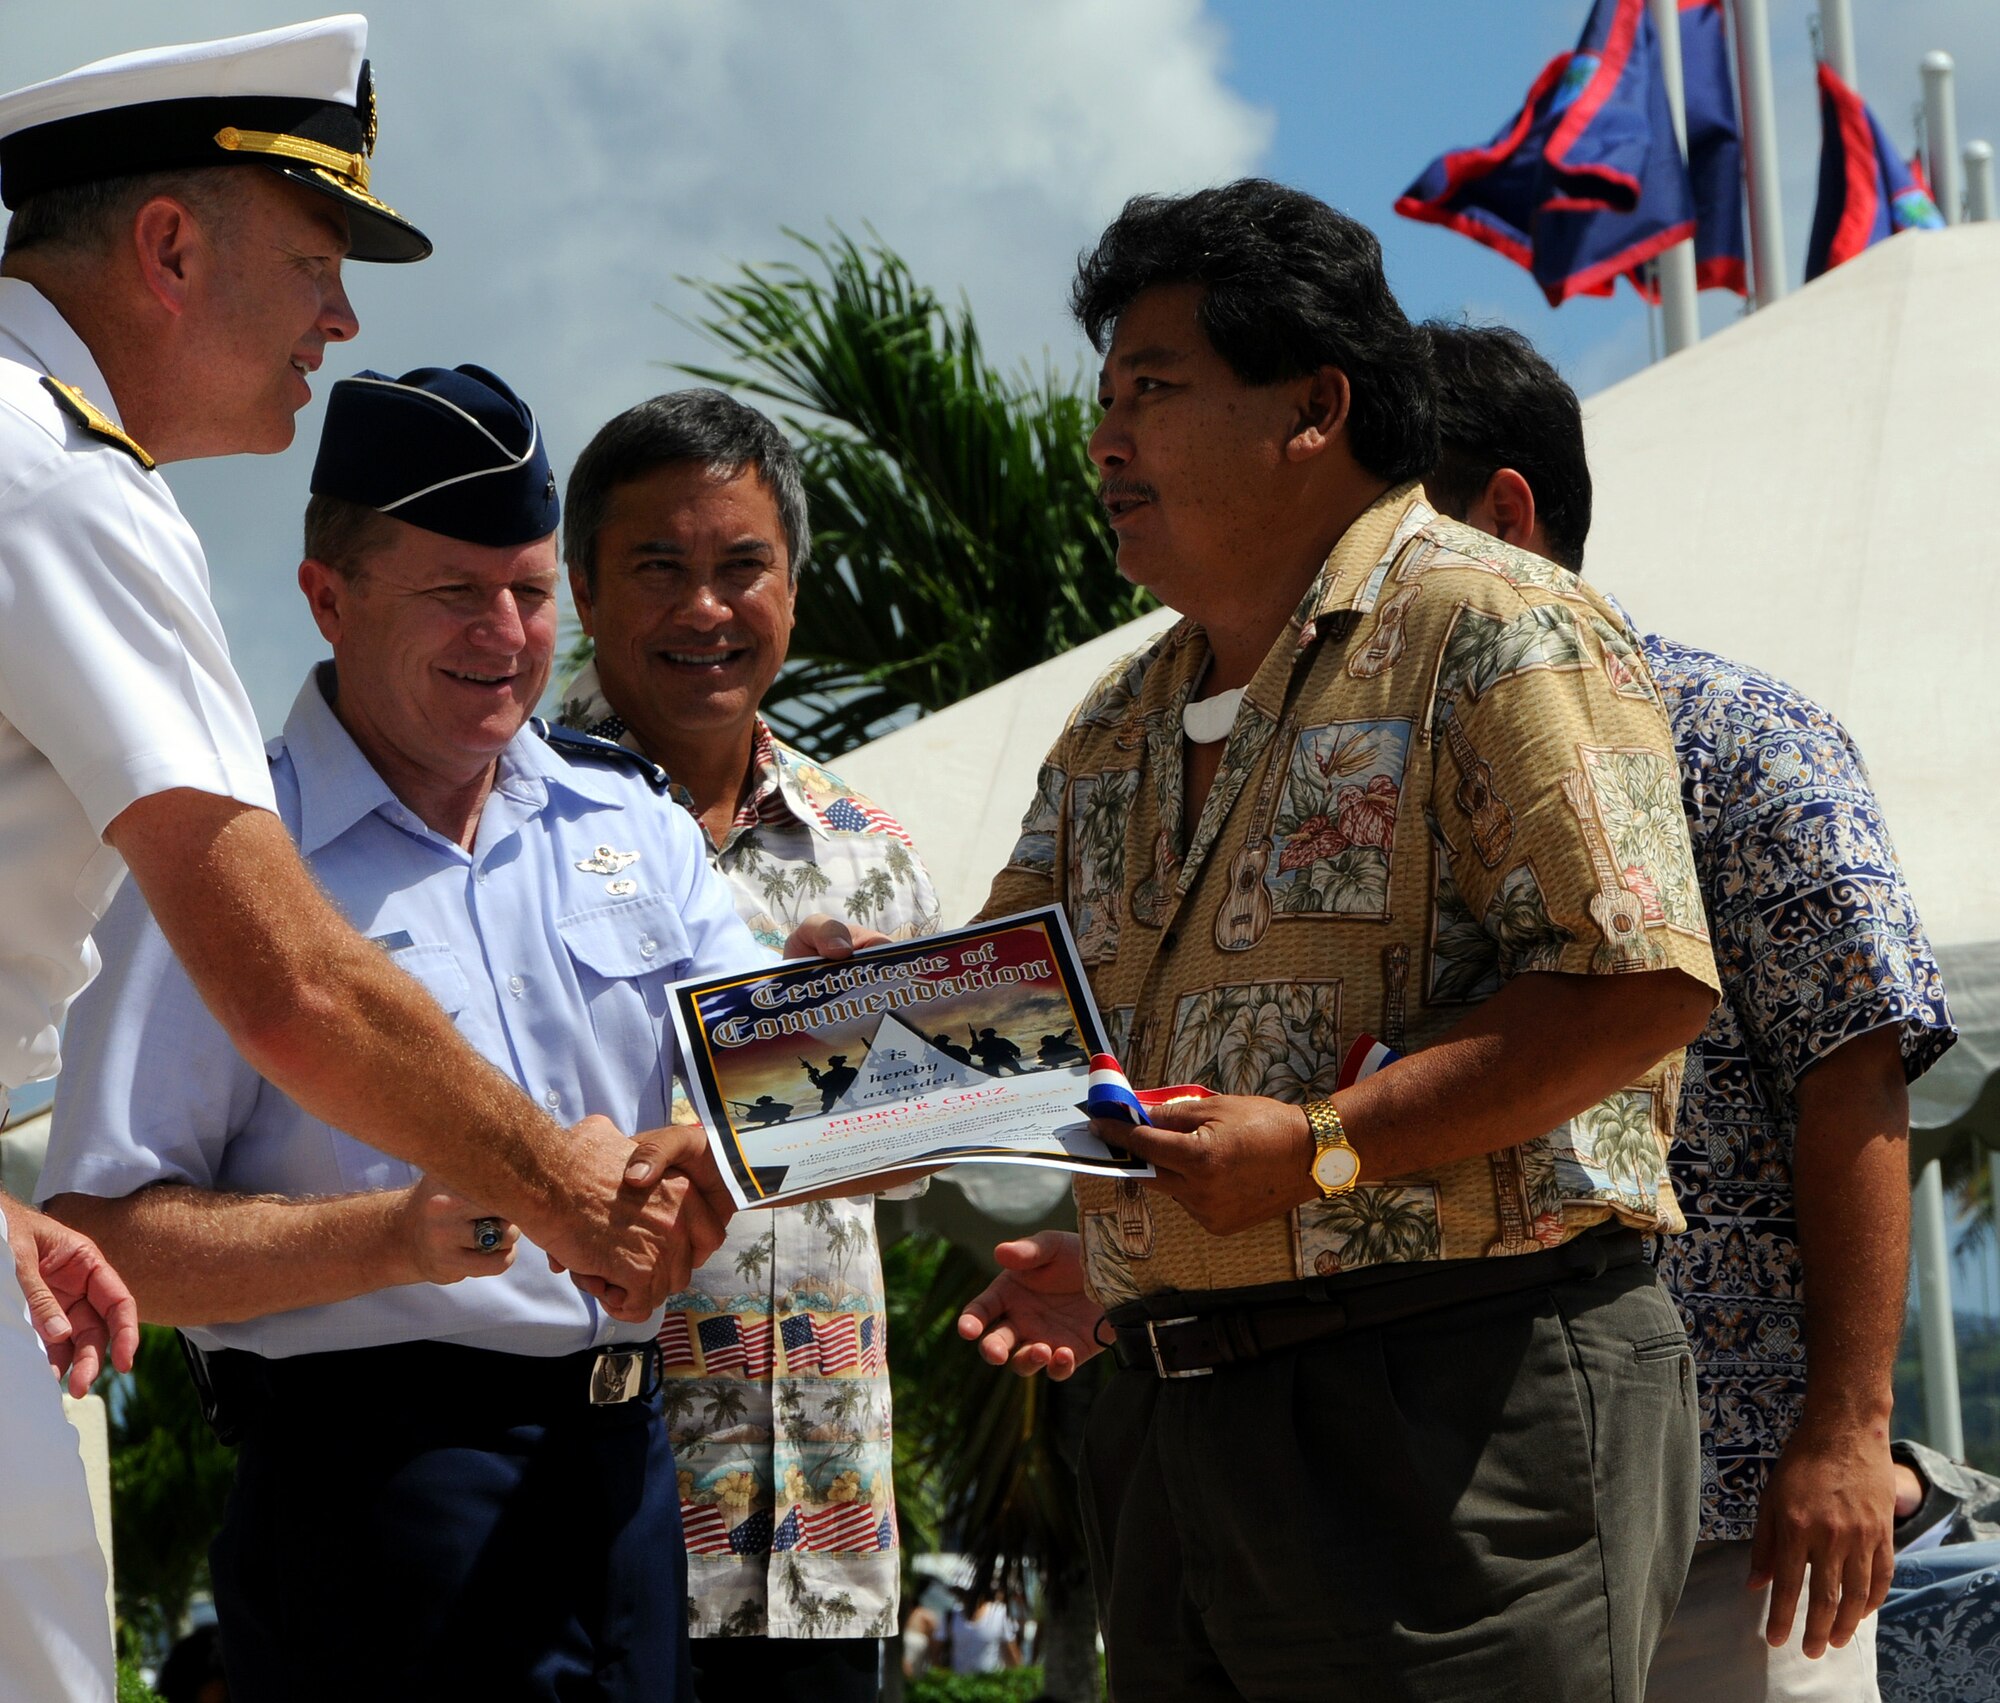 ANDERSEN AIR FORCE BASE, Guam - Pedro Cruz, a retired Air Force veteran, accepts an award from Rear Adm. William French for Village Veteran of the Year during the the Veterans Day Ceremony at the Ricardo J. Bordallo Governors Complex in Adelup, Guam Nov. 11. Each village was represented with a Veteran of the Year. (U.S. Air Force phtoto by Airman 1st Class Courtney Witt)